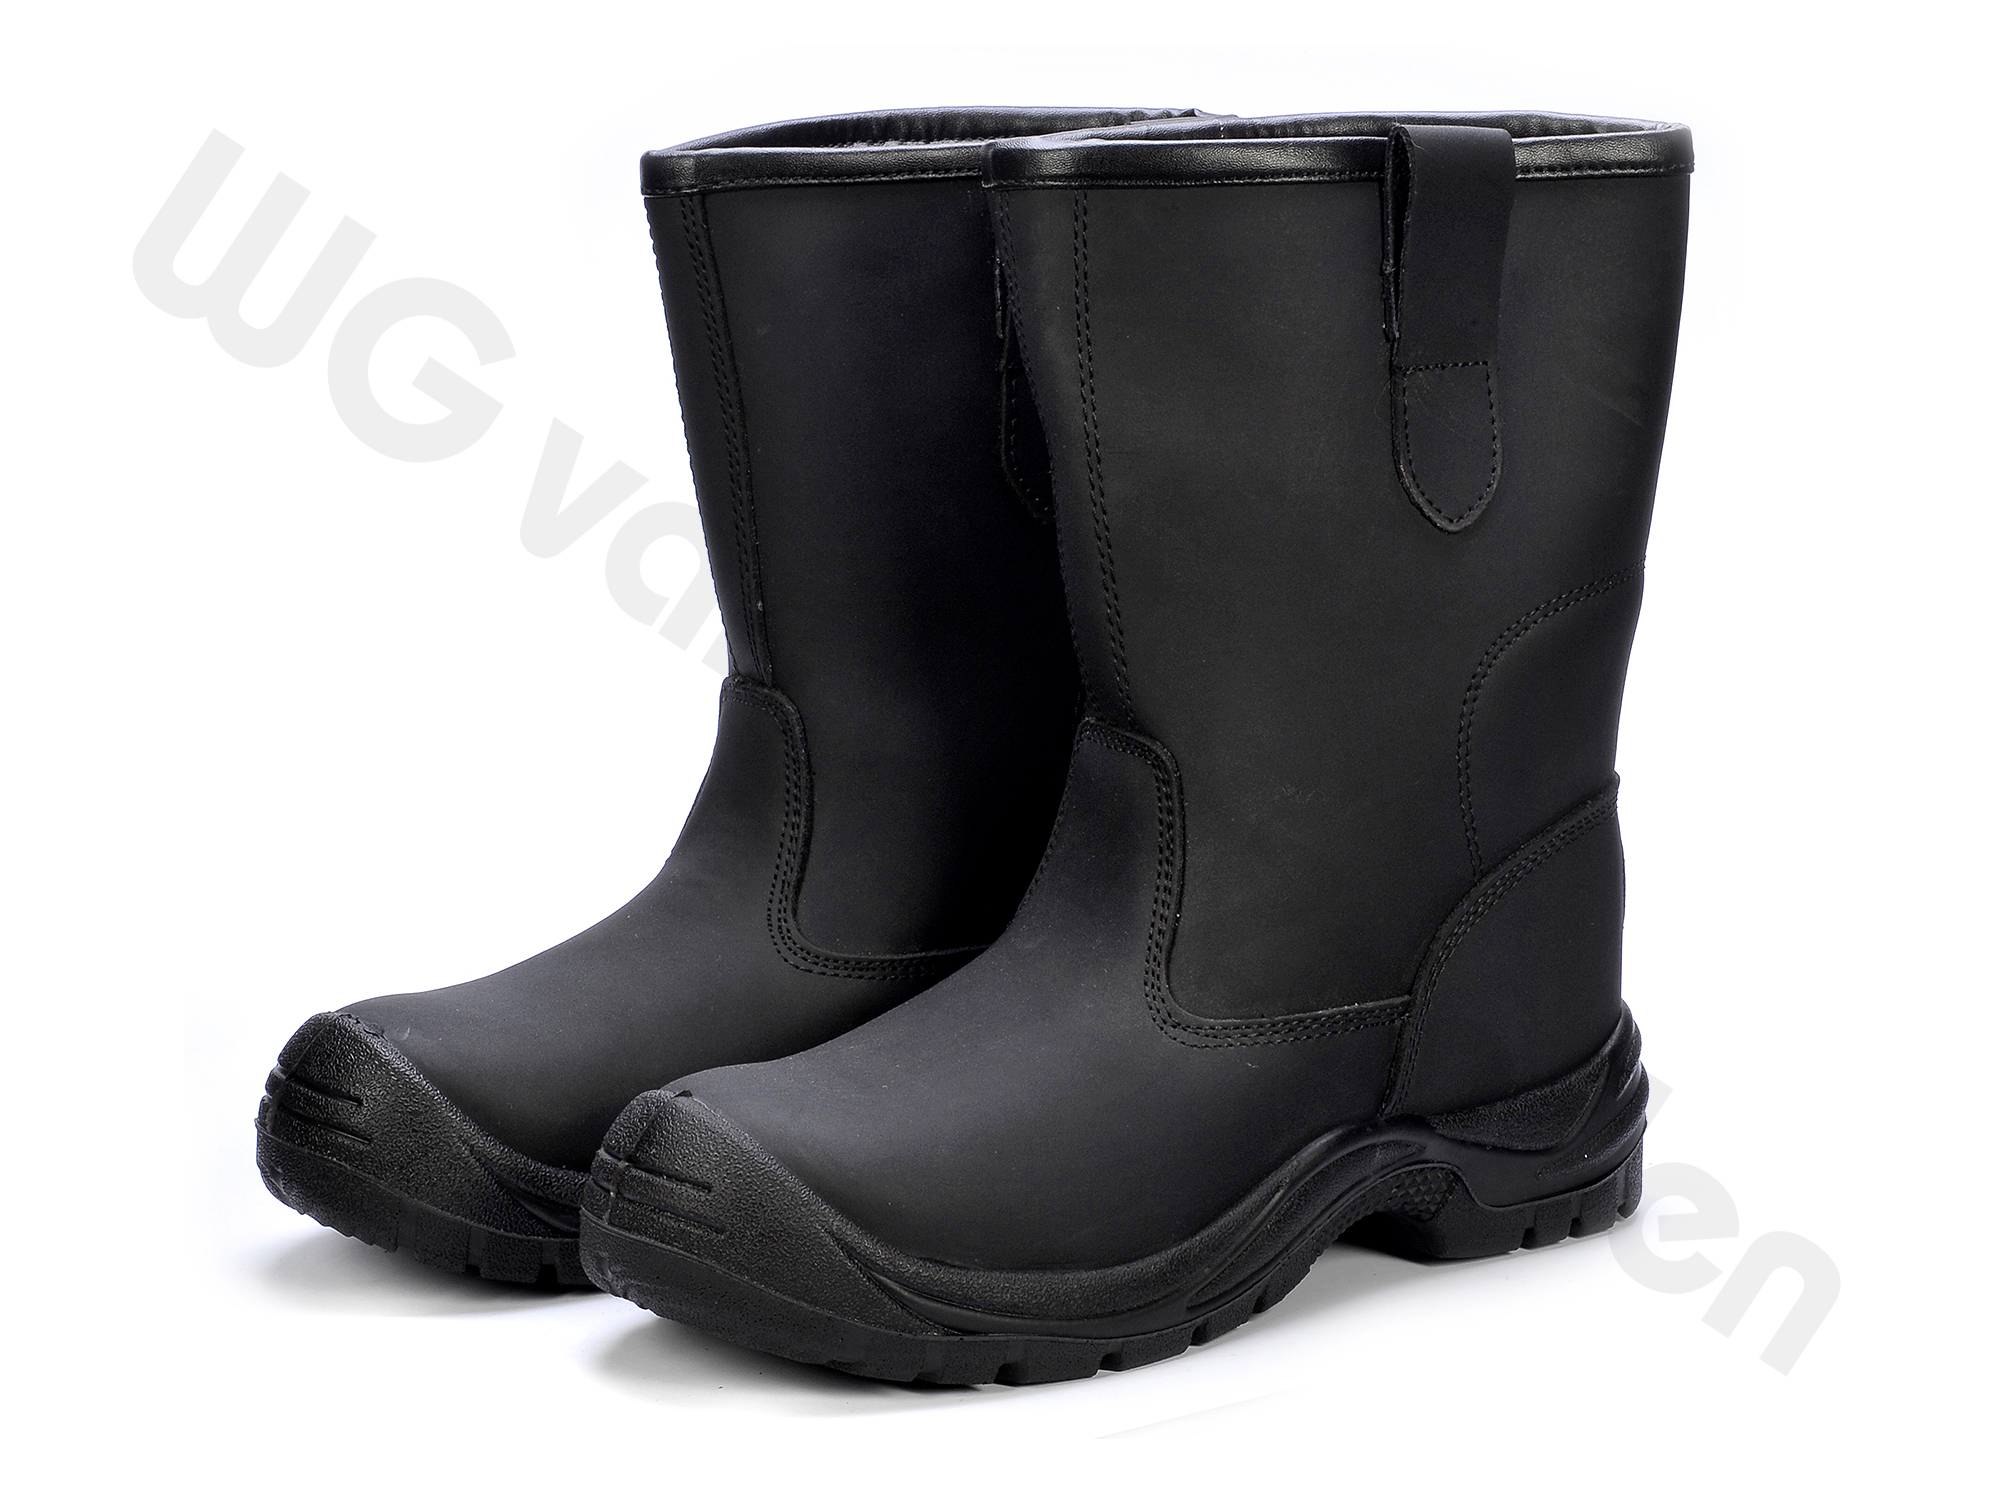 880351 BOOTS SAFETY S3 LEATHER W/STEEL TOE AND LINING 40/26CM